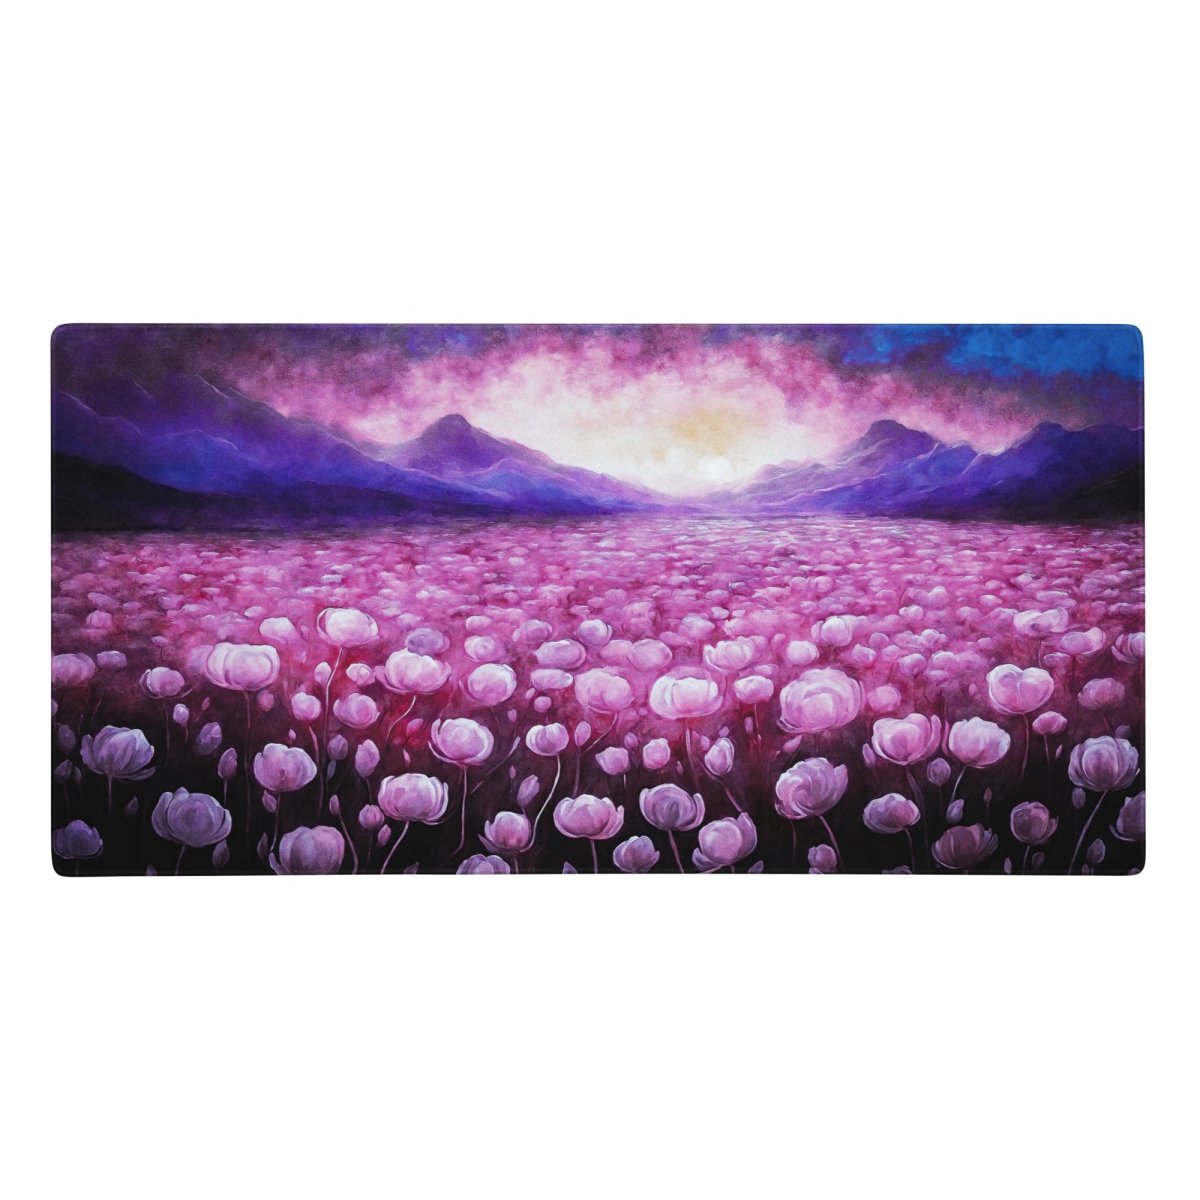 Flower doom - Gaming mouse pad - Ever colorful